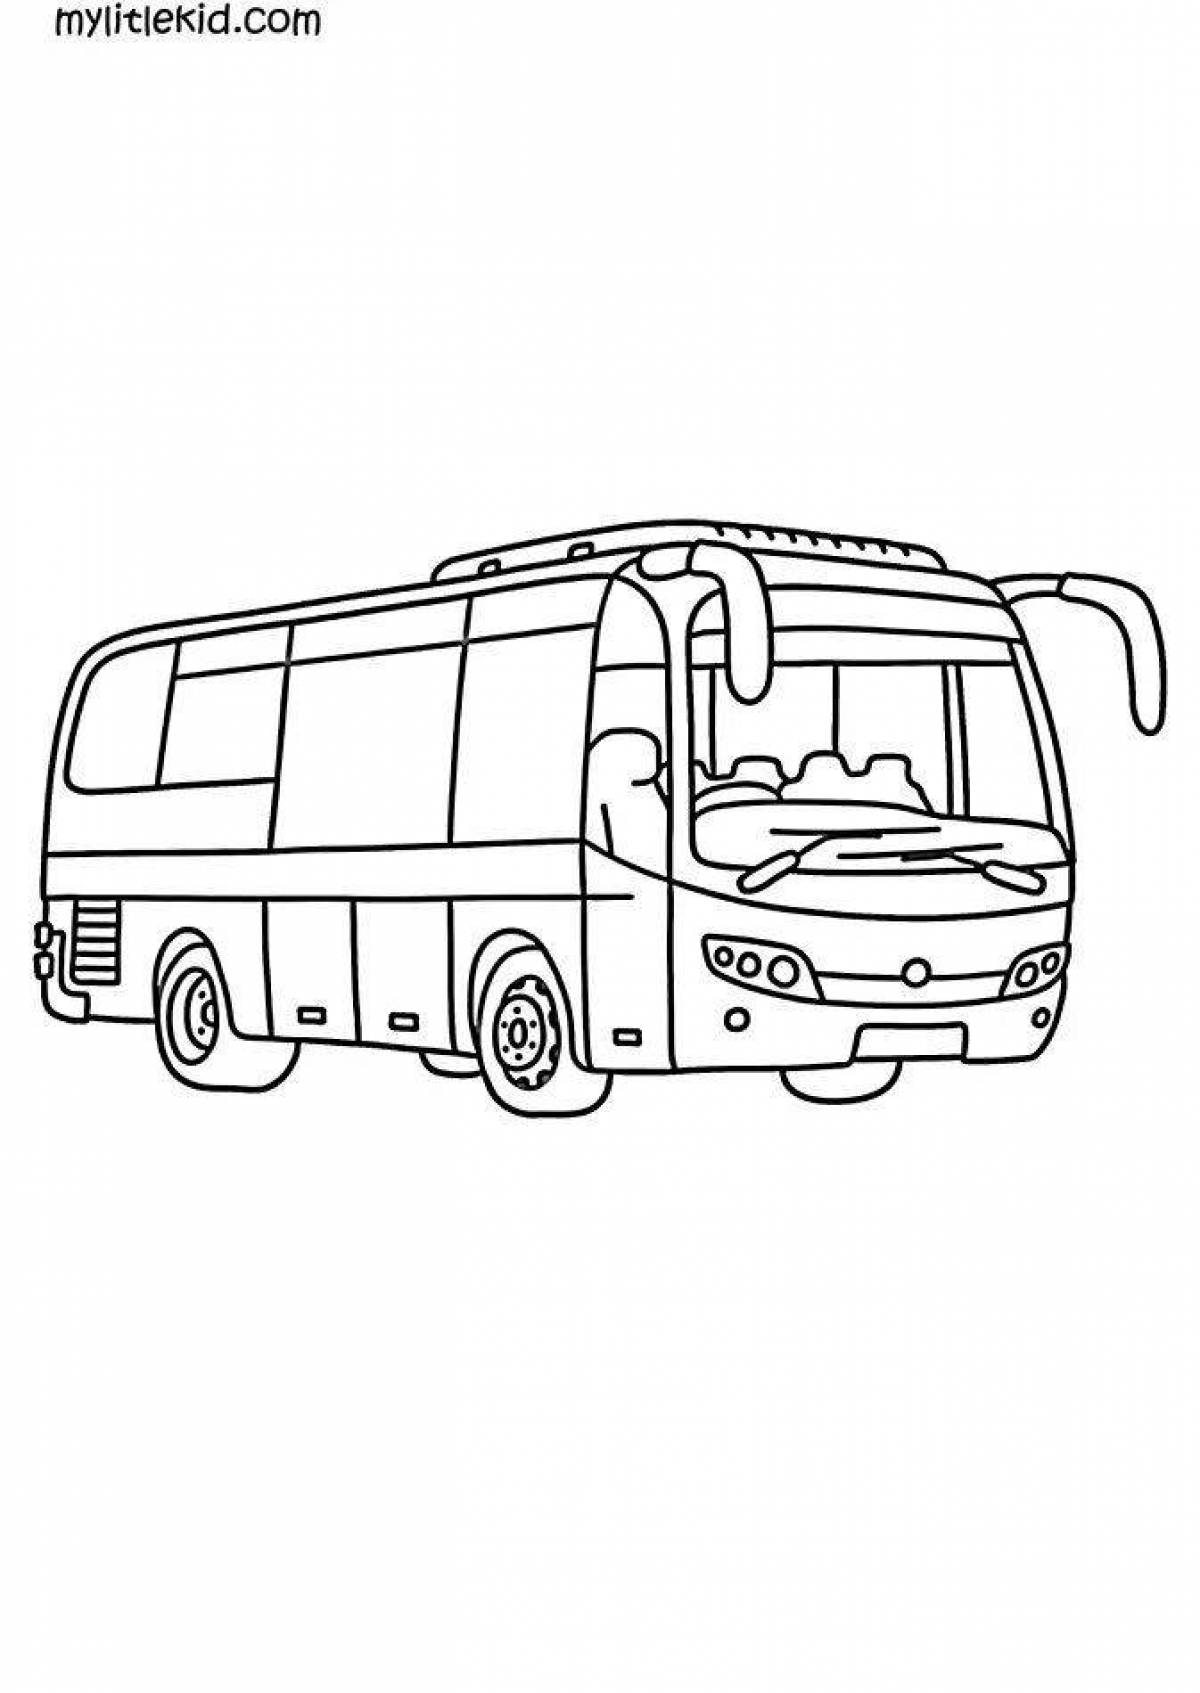 Colorful bus coloring book for 3-4 year olds